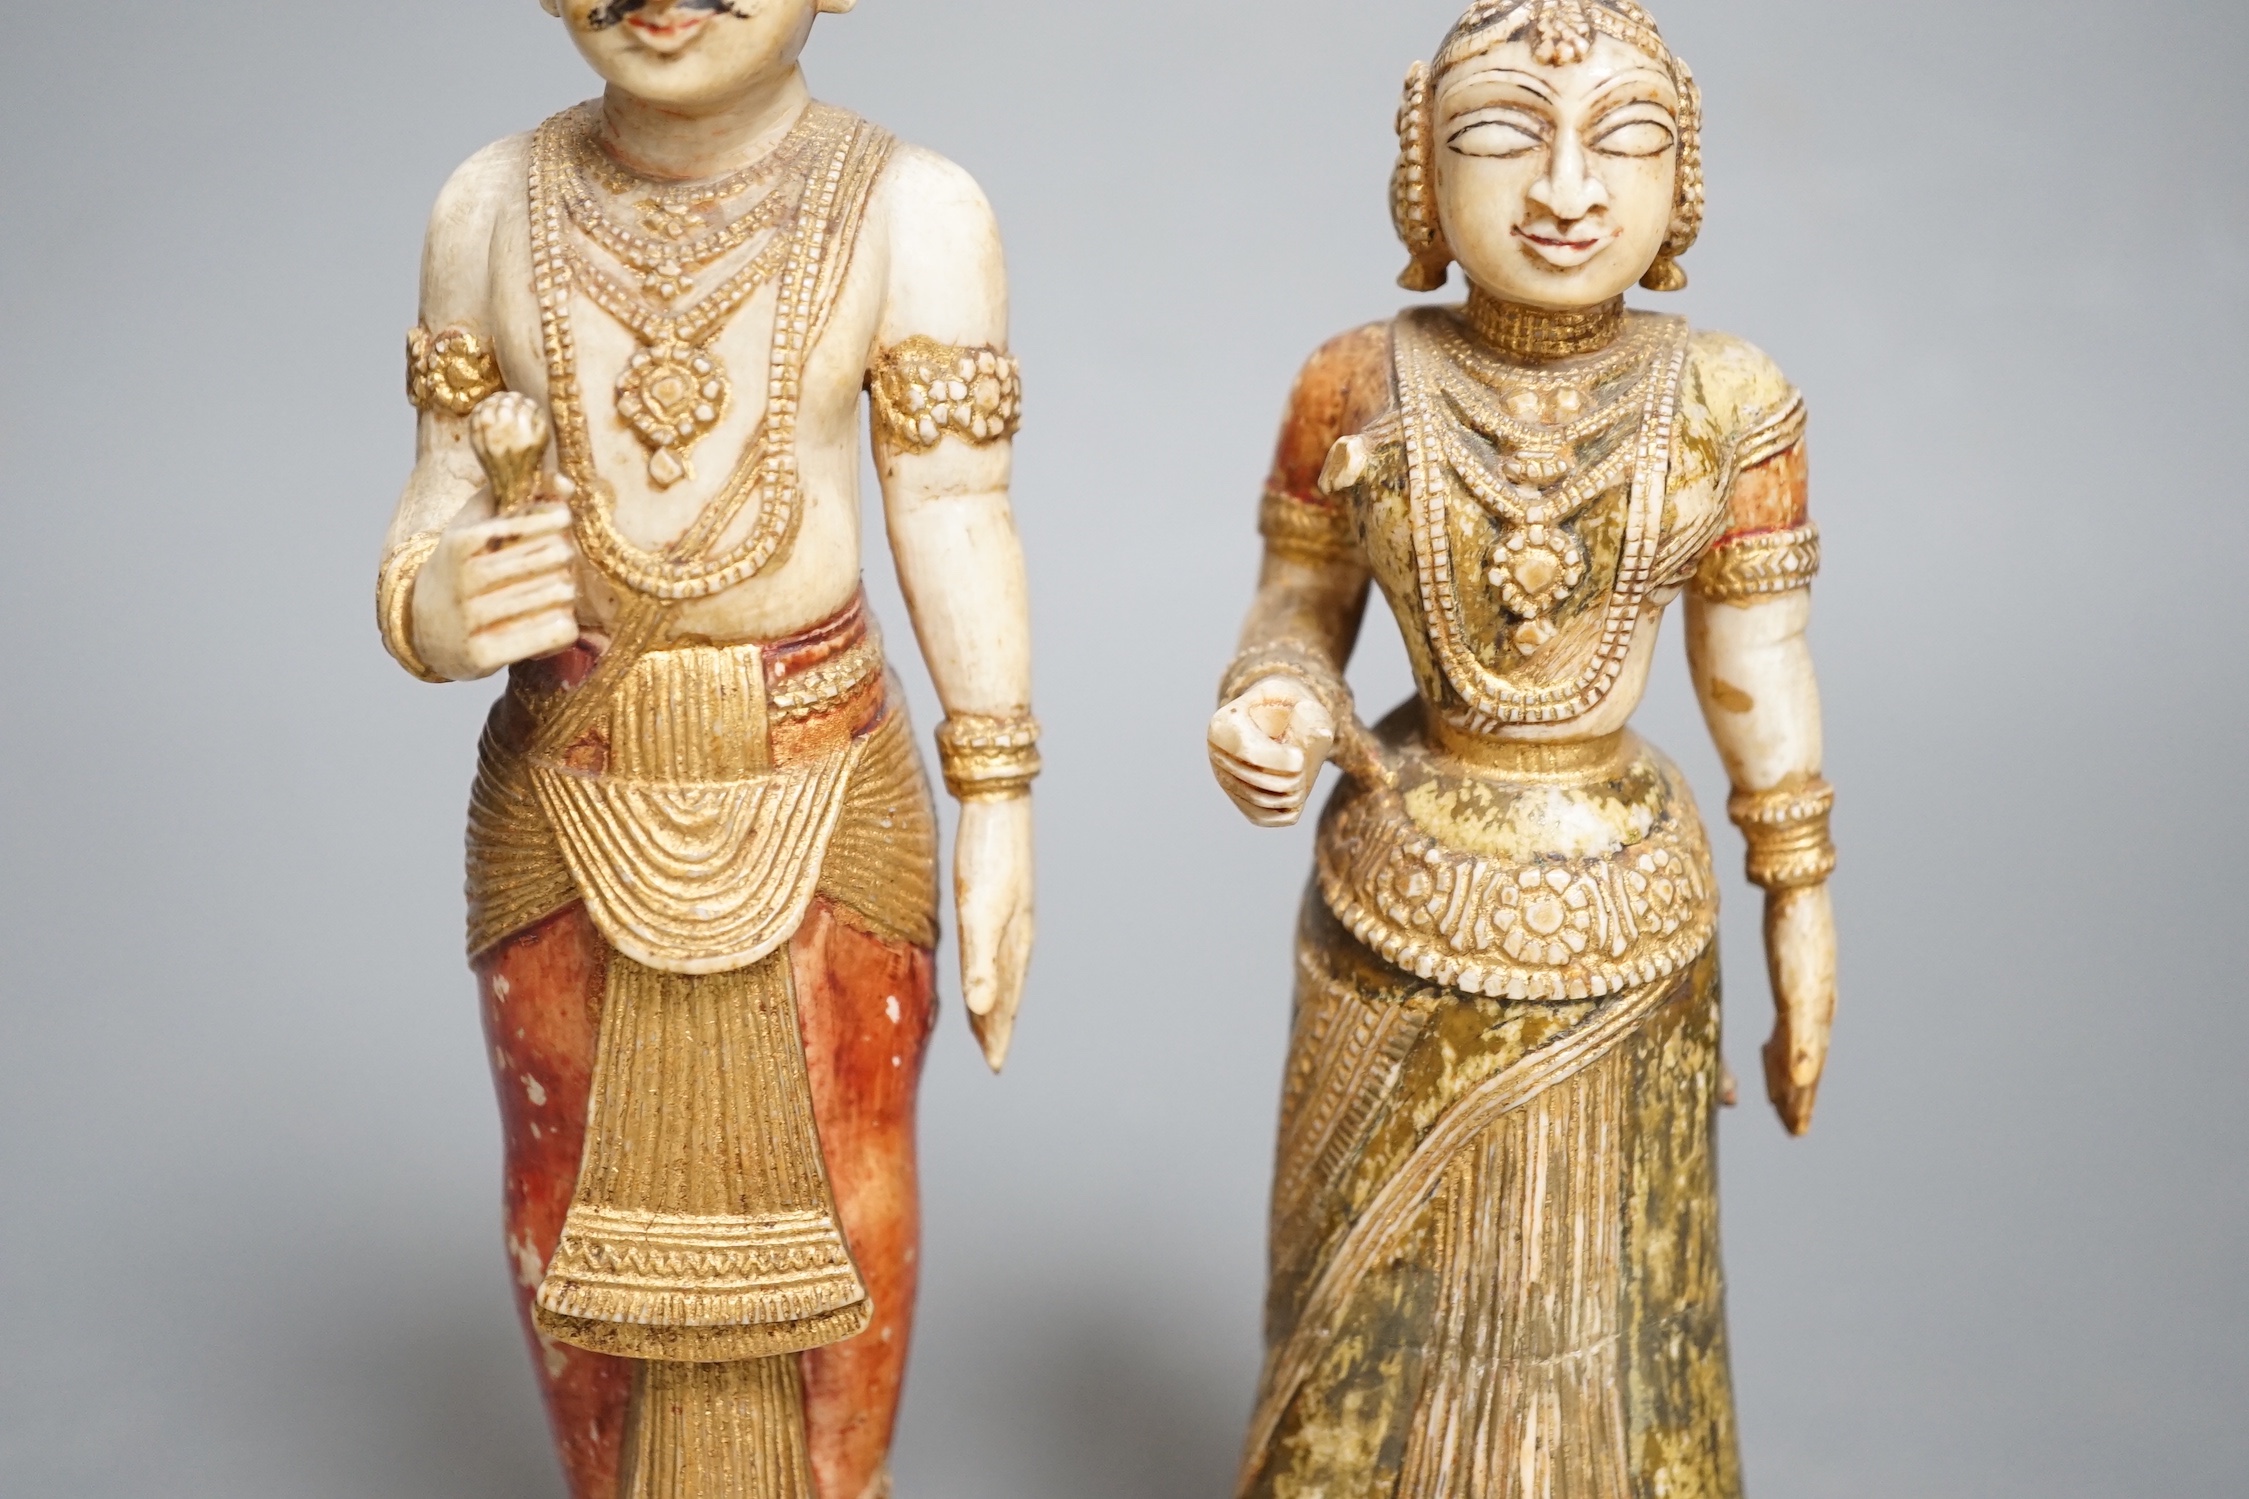 A pair of 18th century painted carved Indian ivory figures, male 7.6cm high female: 5.5cm high